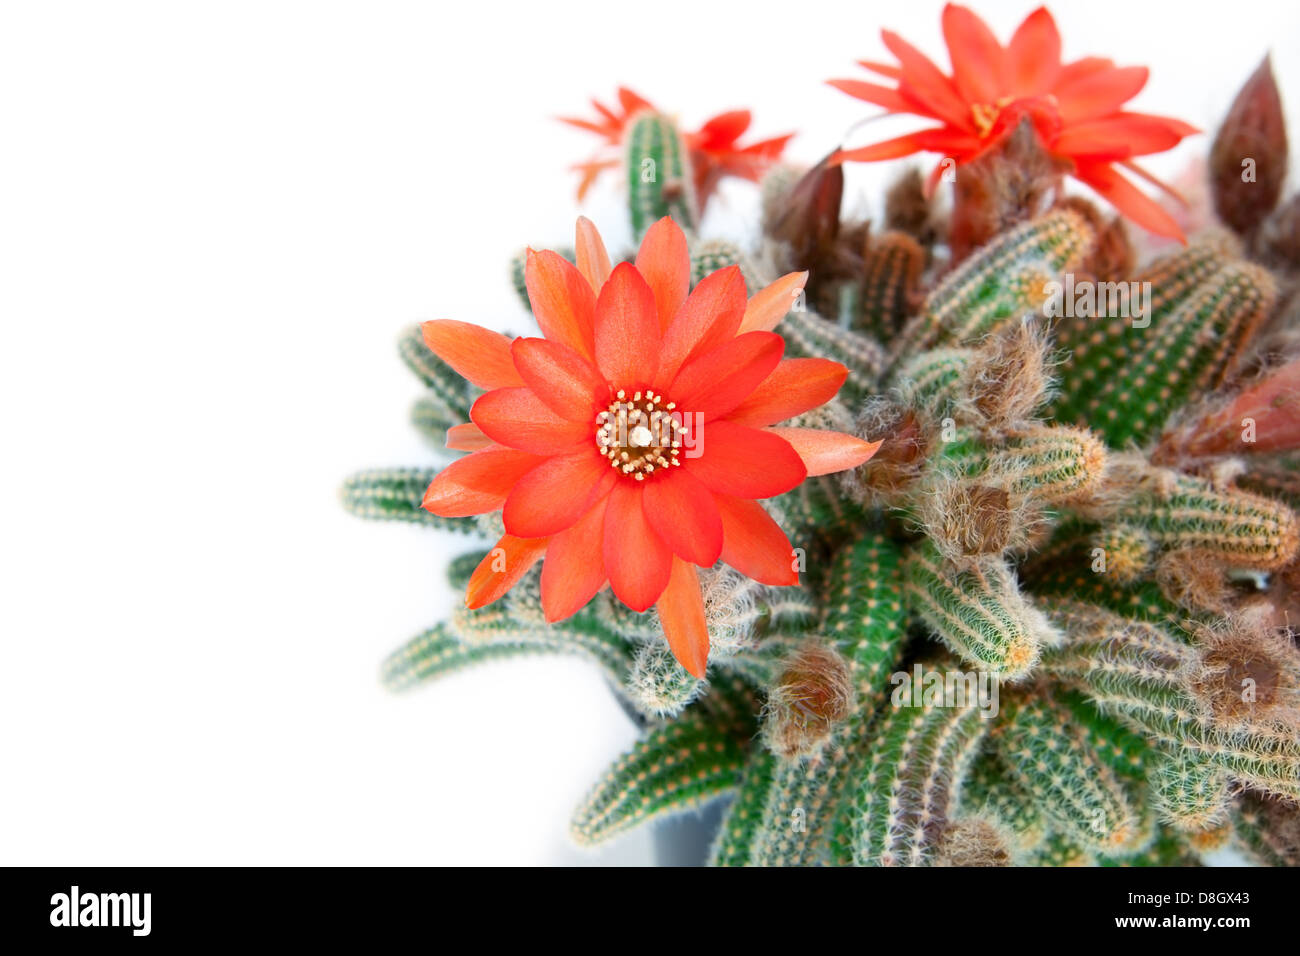 red cactus flower over white background Stock Photo